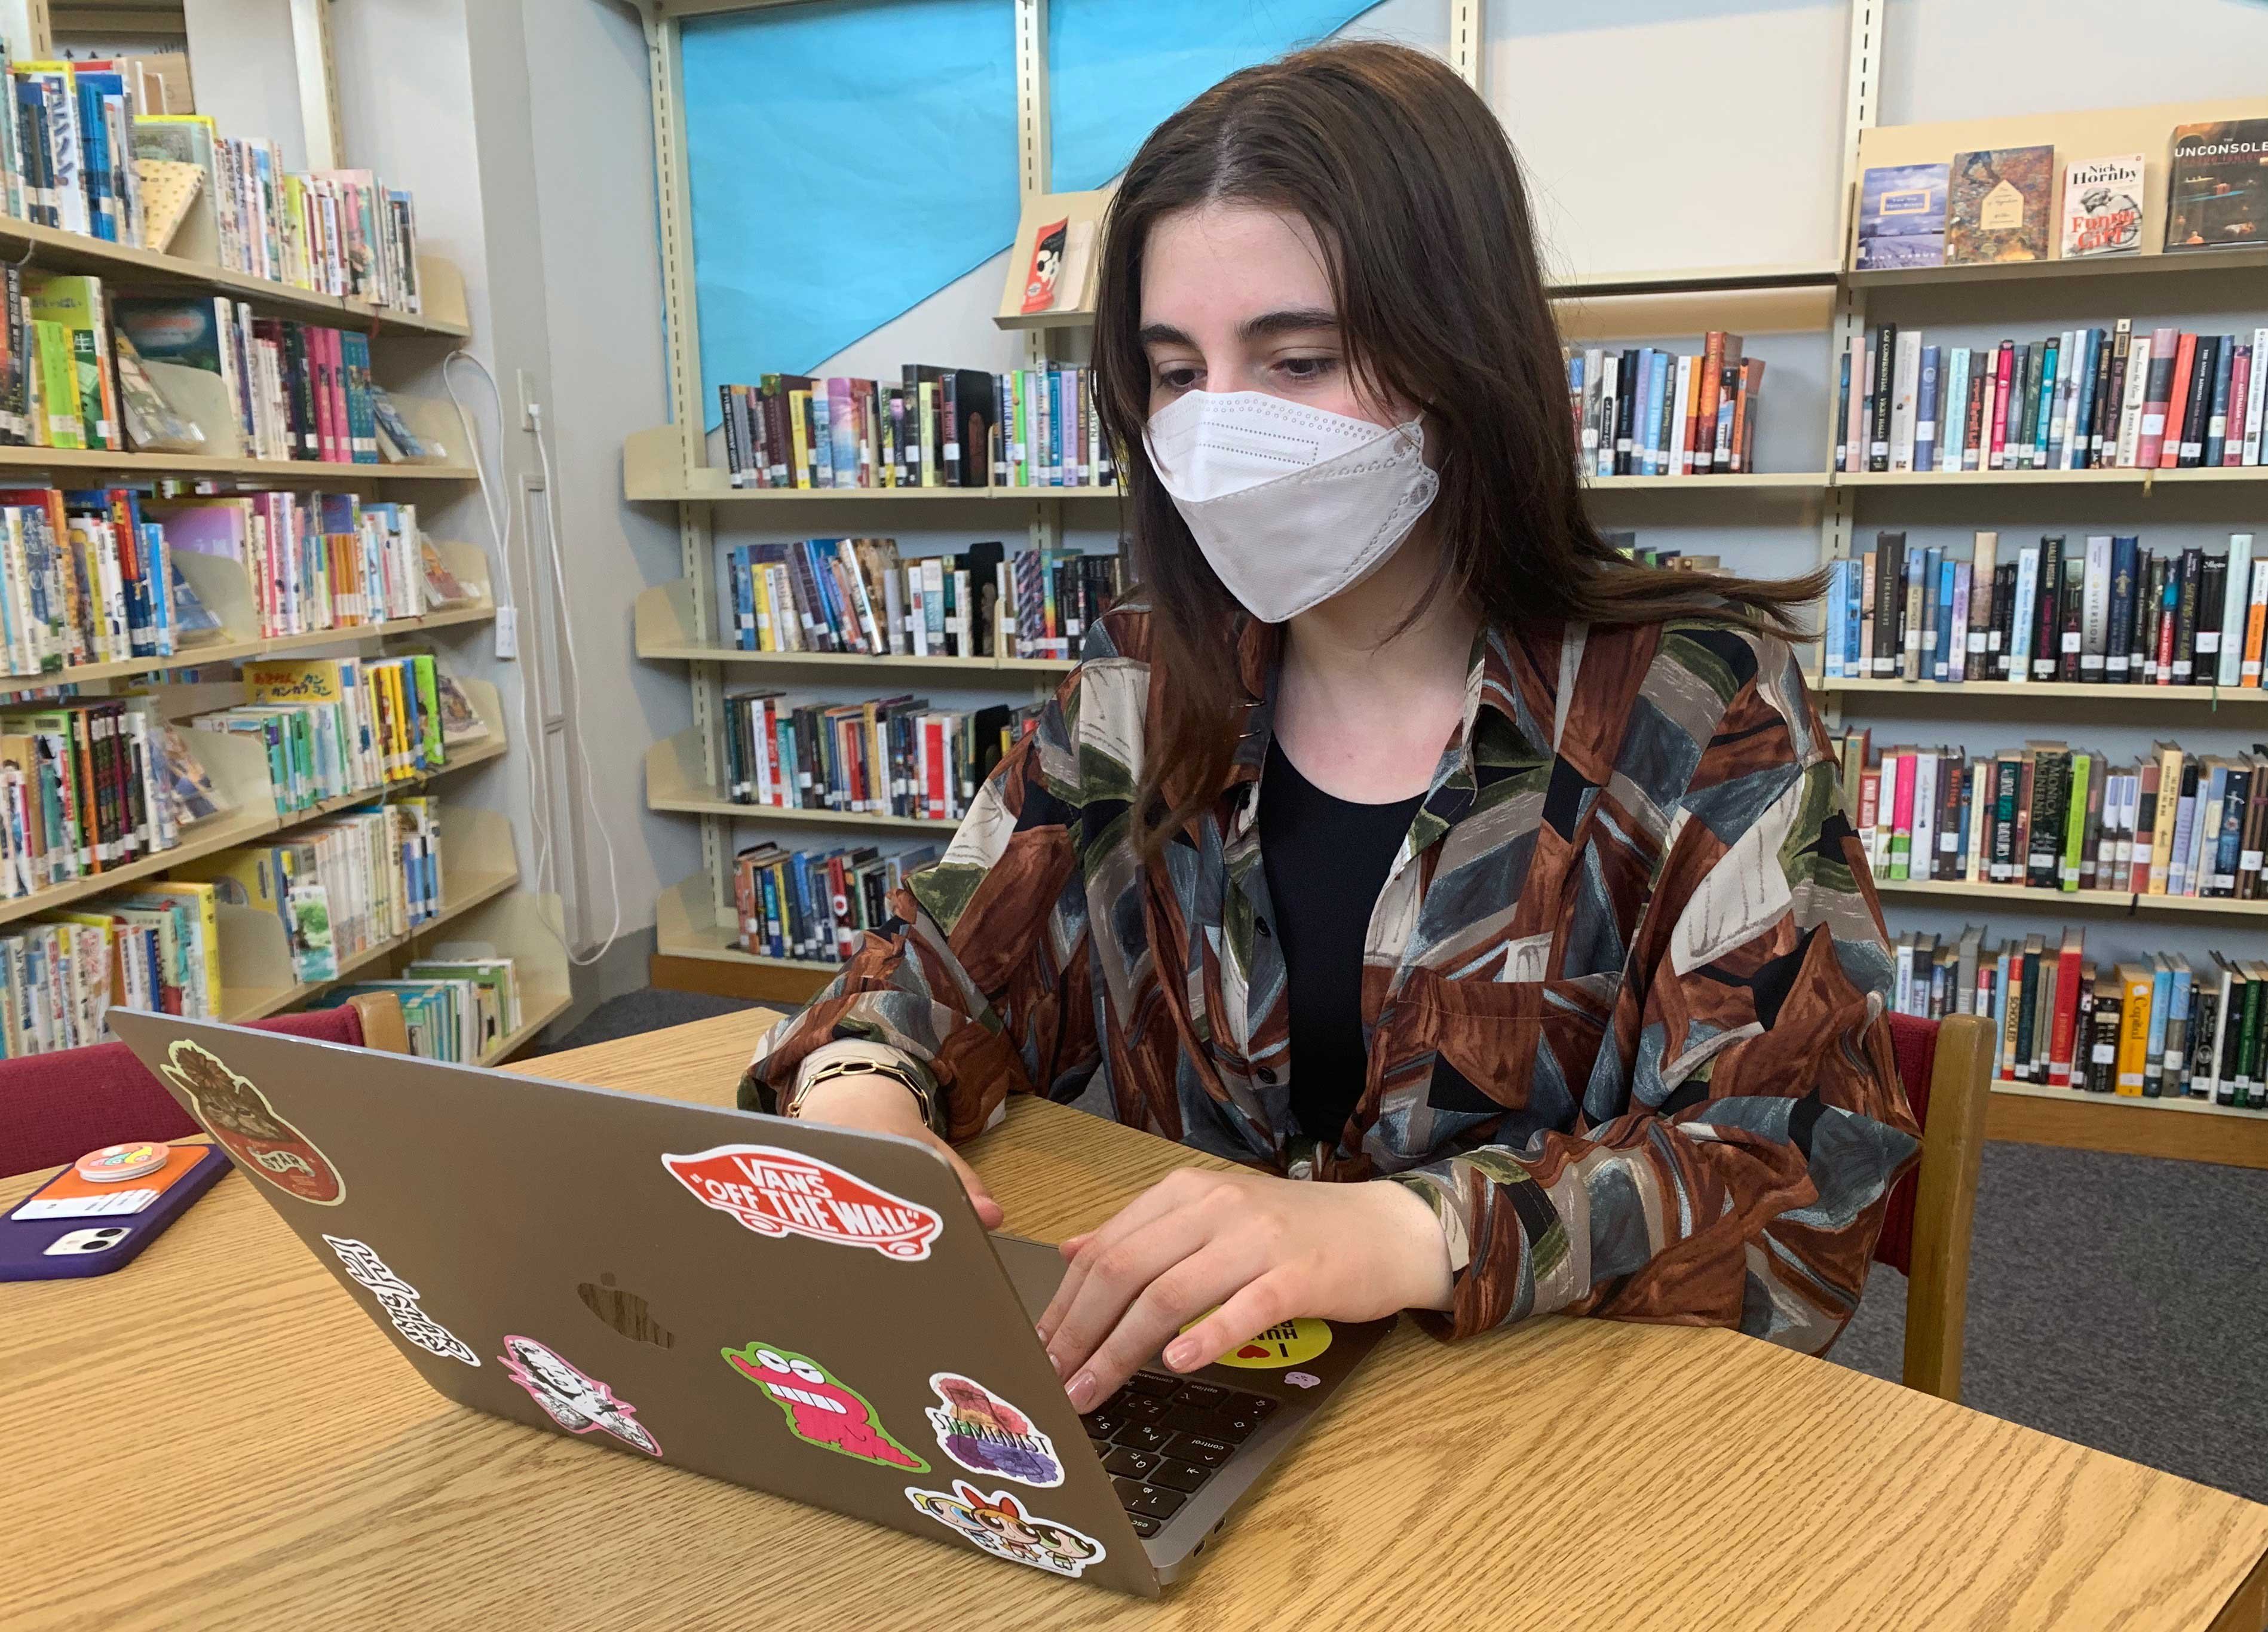 A student studies online in the school library.